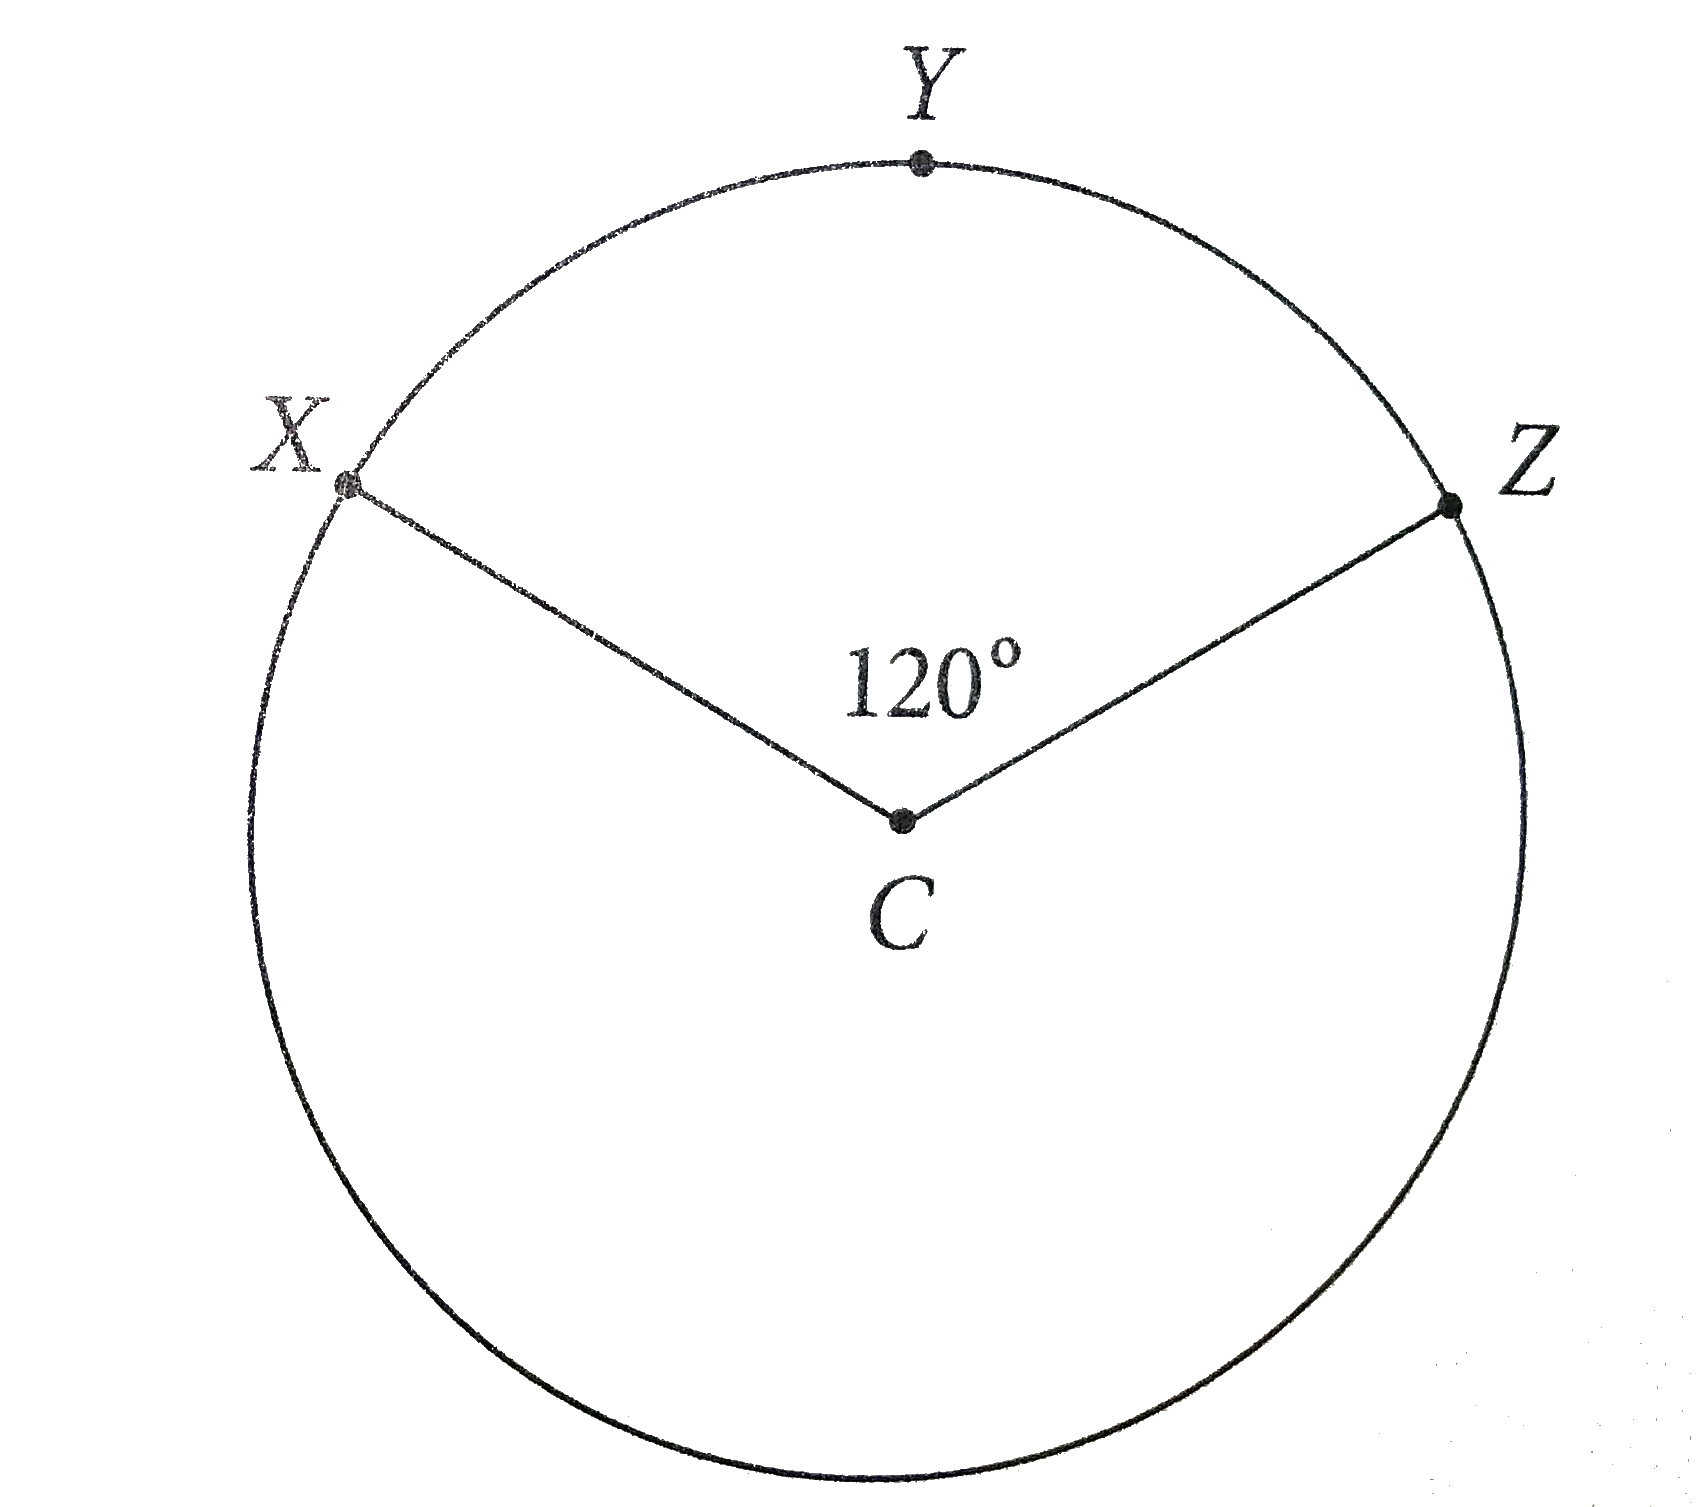 In the figure above, C is the center of a circle. If the length of the arc XYZ is 4pi, what is the radius of the circle?